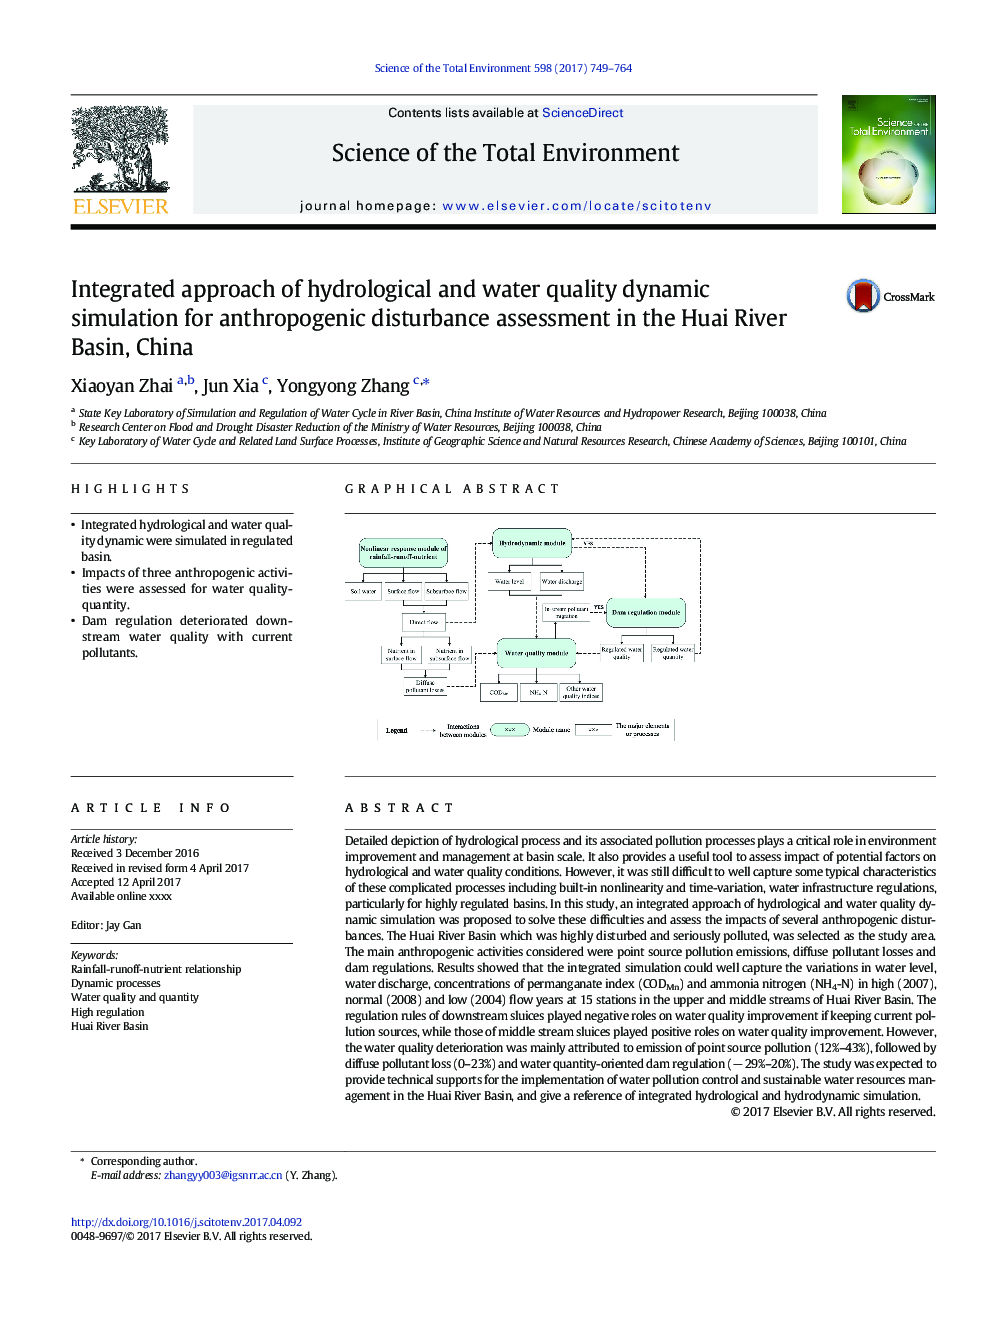 Integrated approach of hydrological and water quality dynamic simulation for anthropogenic disturbance assessment in the Huai River Basin, China